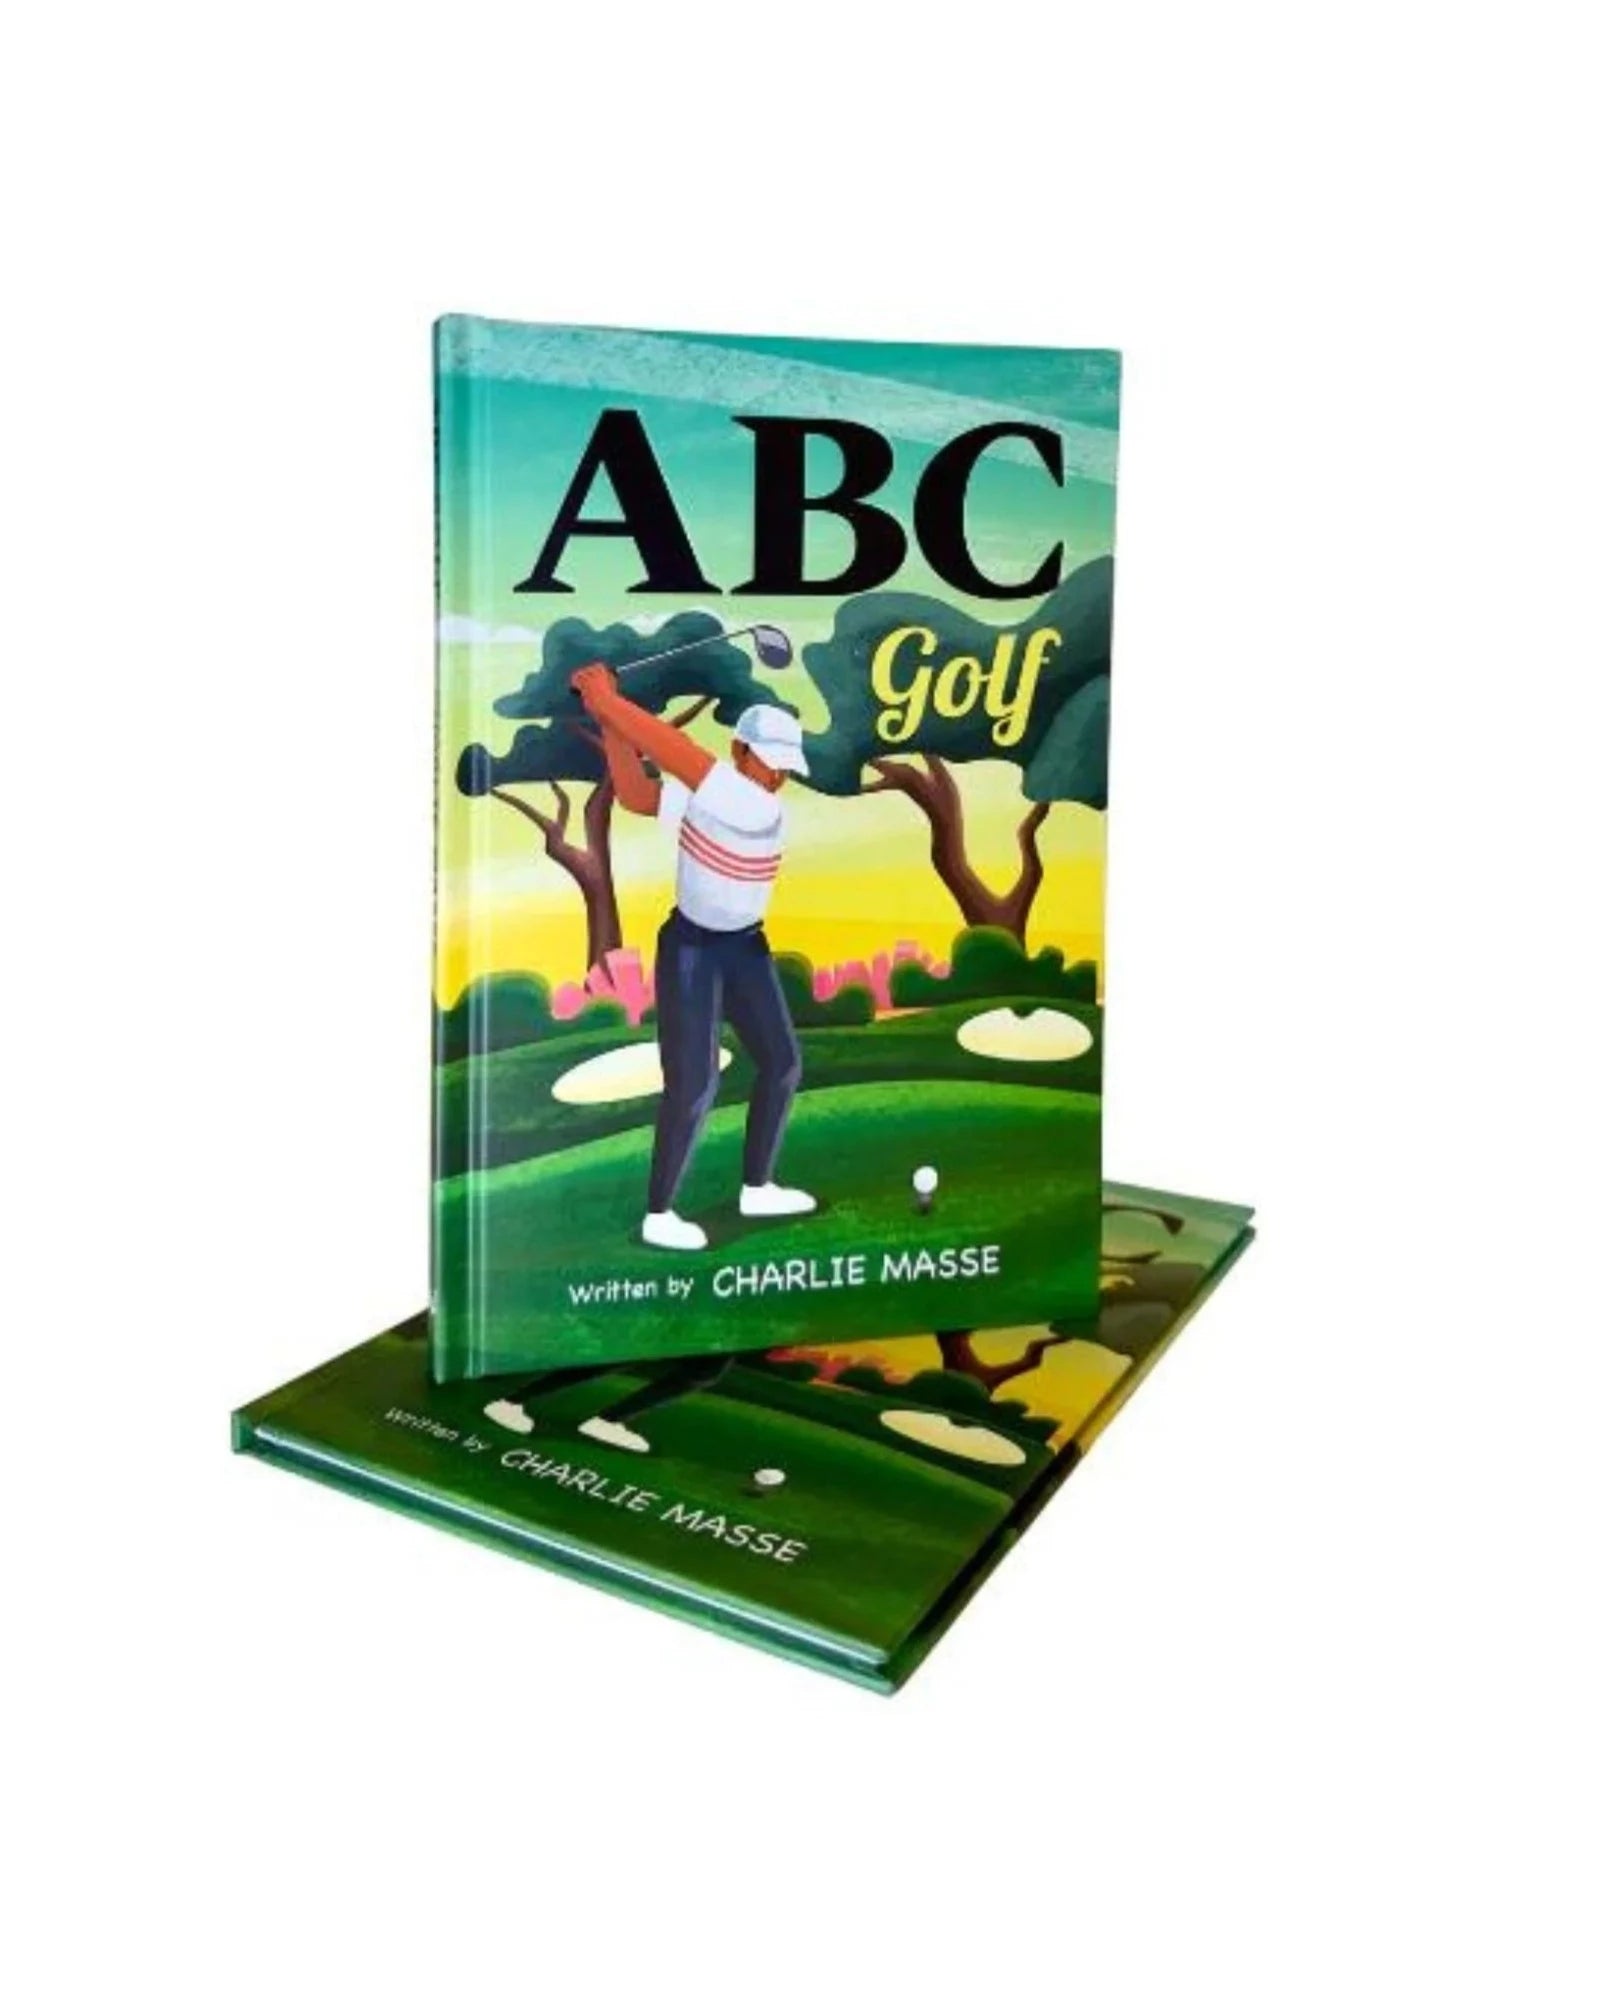 ABC Golf book for kids